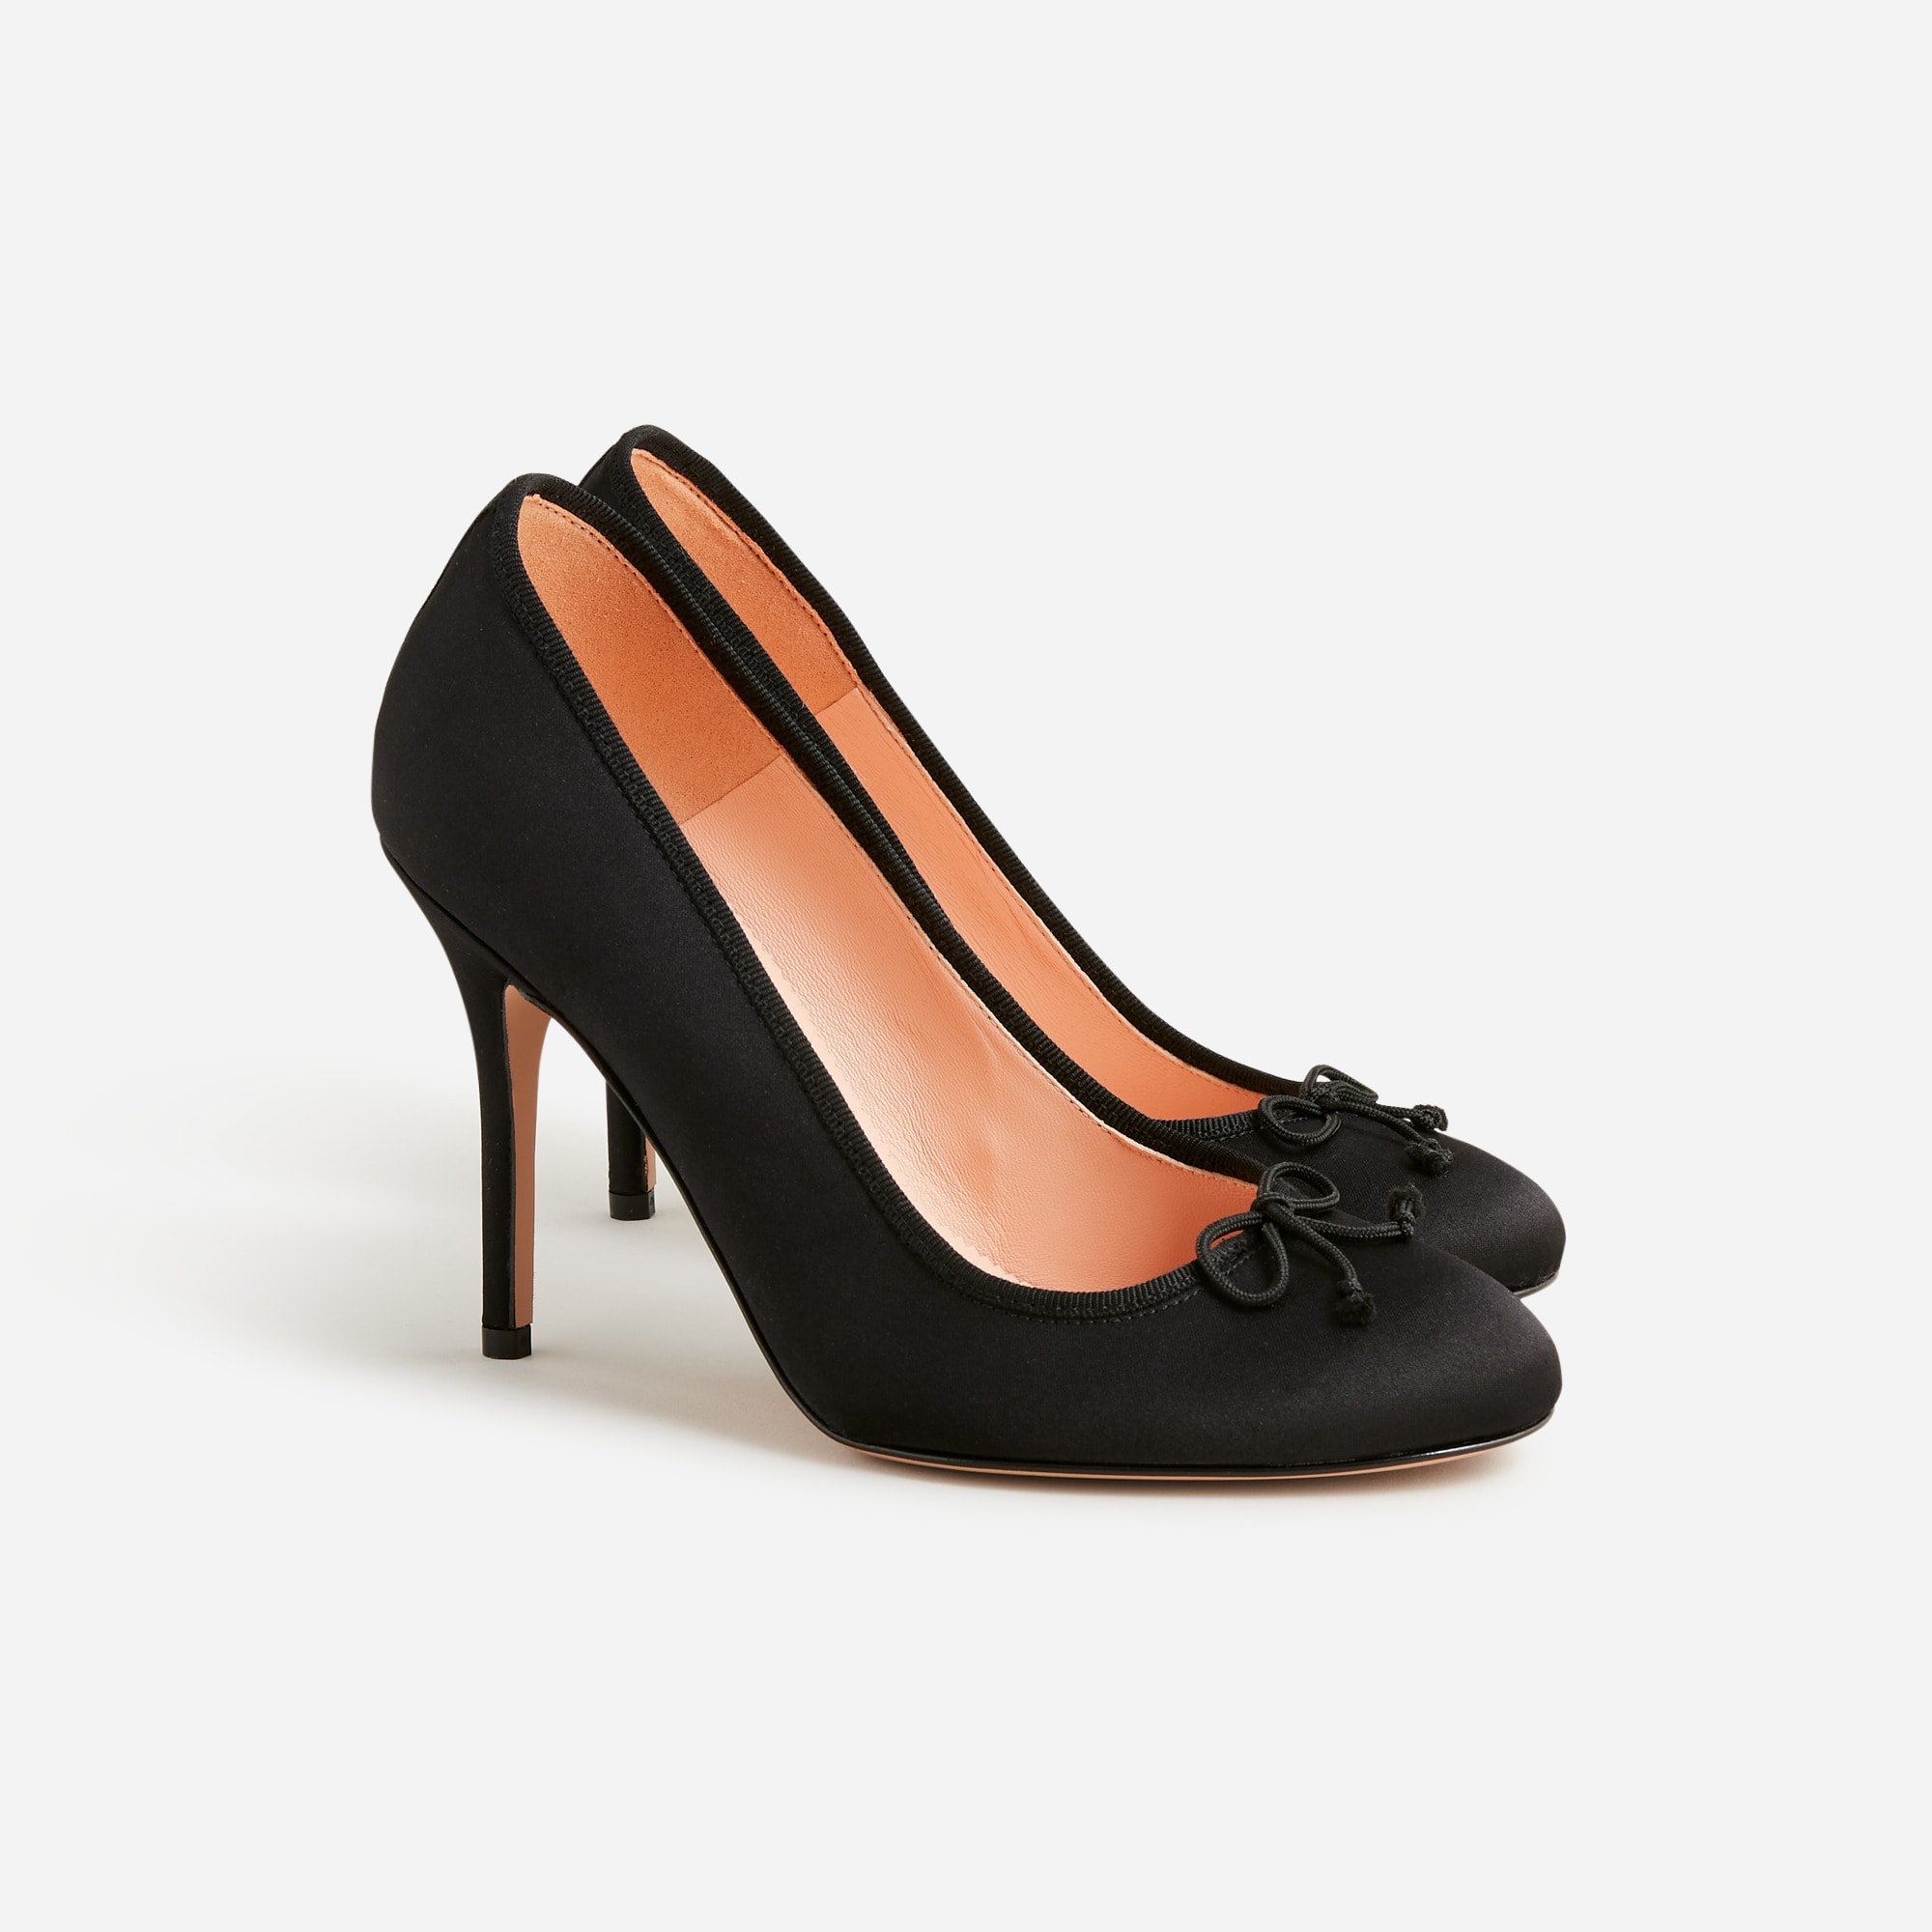 Jcrew Collection made-in-Italy ballet pumps